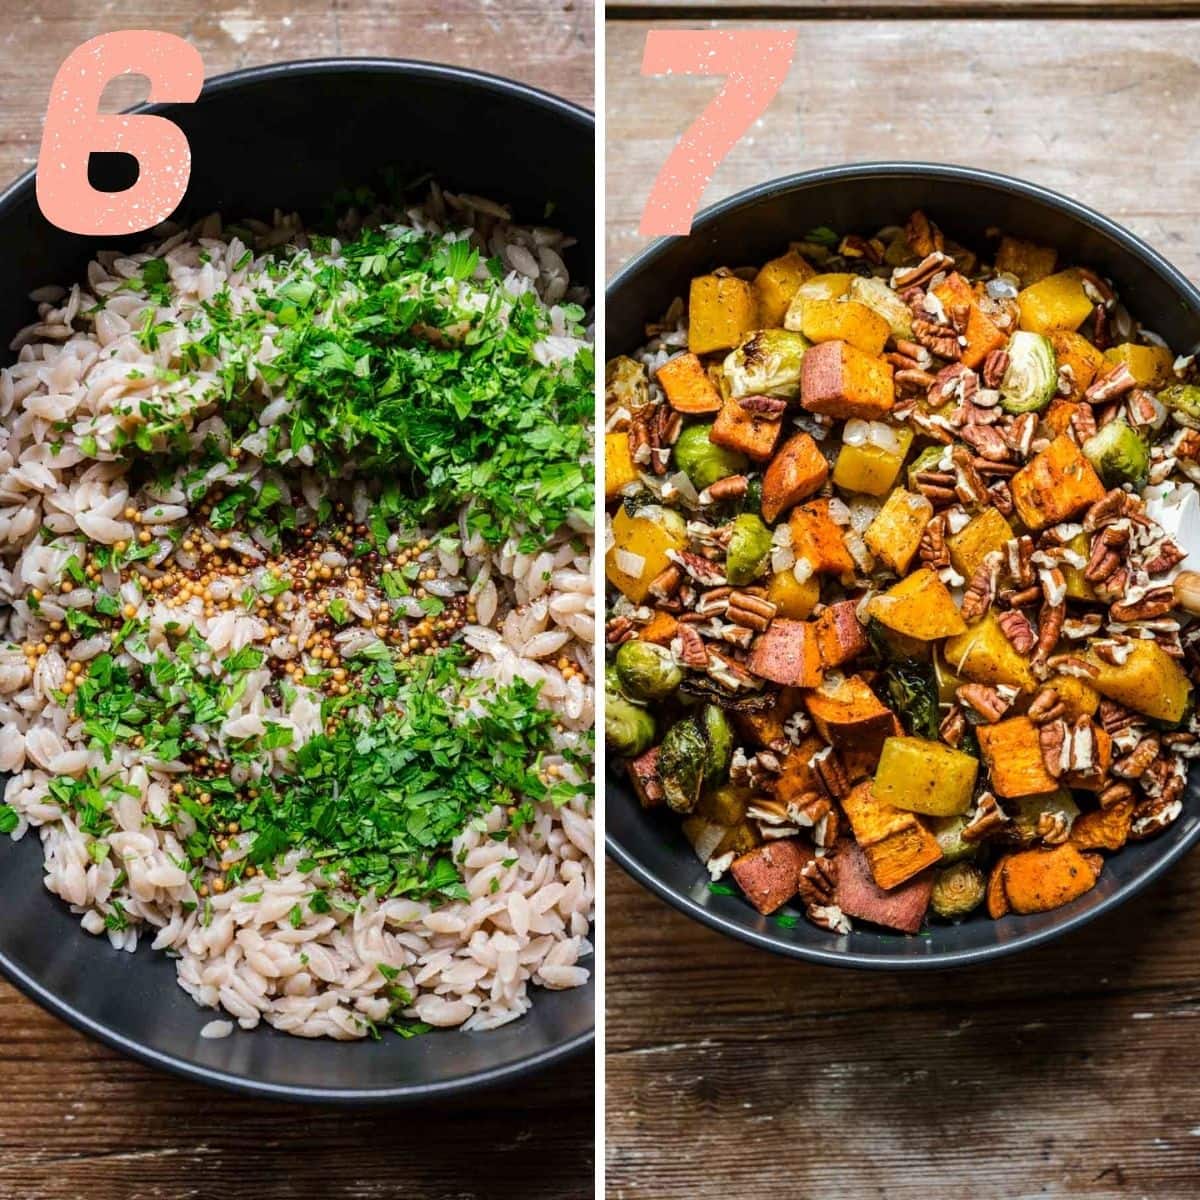 On the left: Orzo salad tossed with dressing and parsley. On the right: nuts and veggies added to salad.